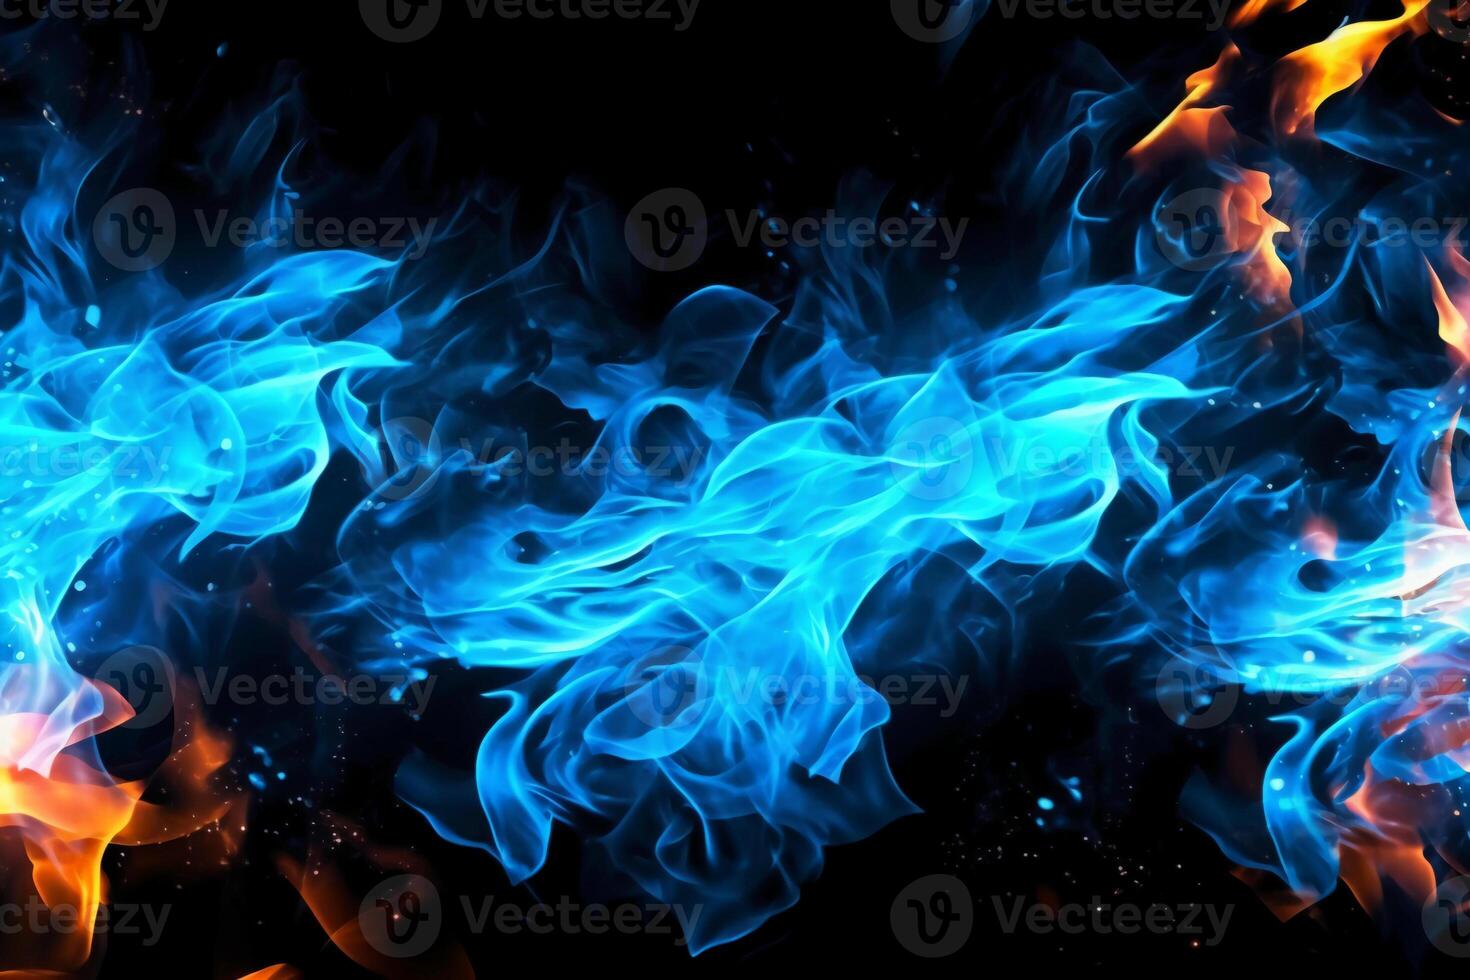 Drawn neon color blue, Burning flame background material abstract hand. photo